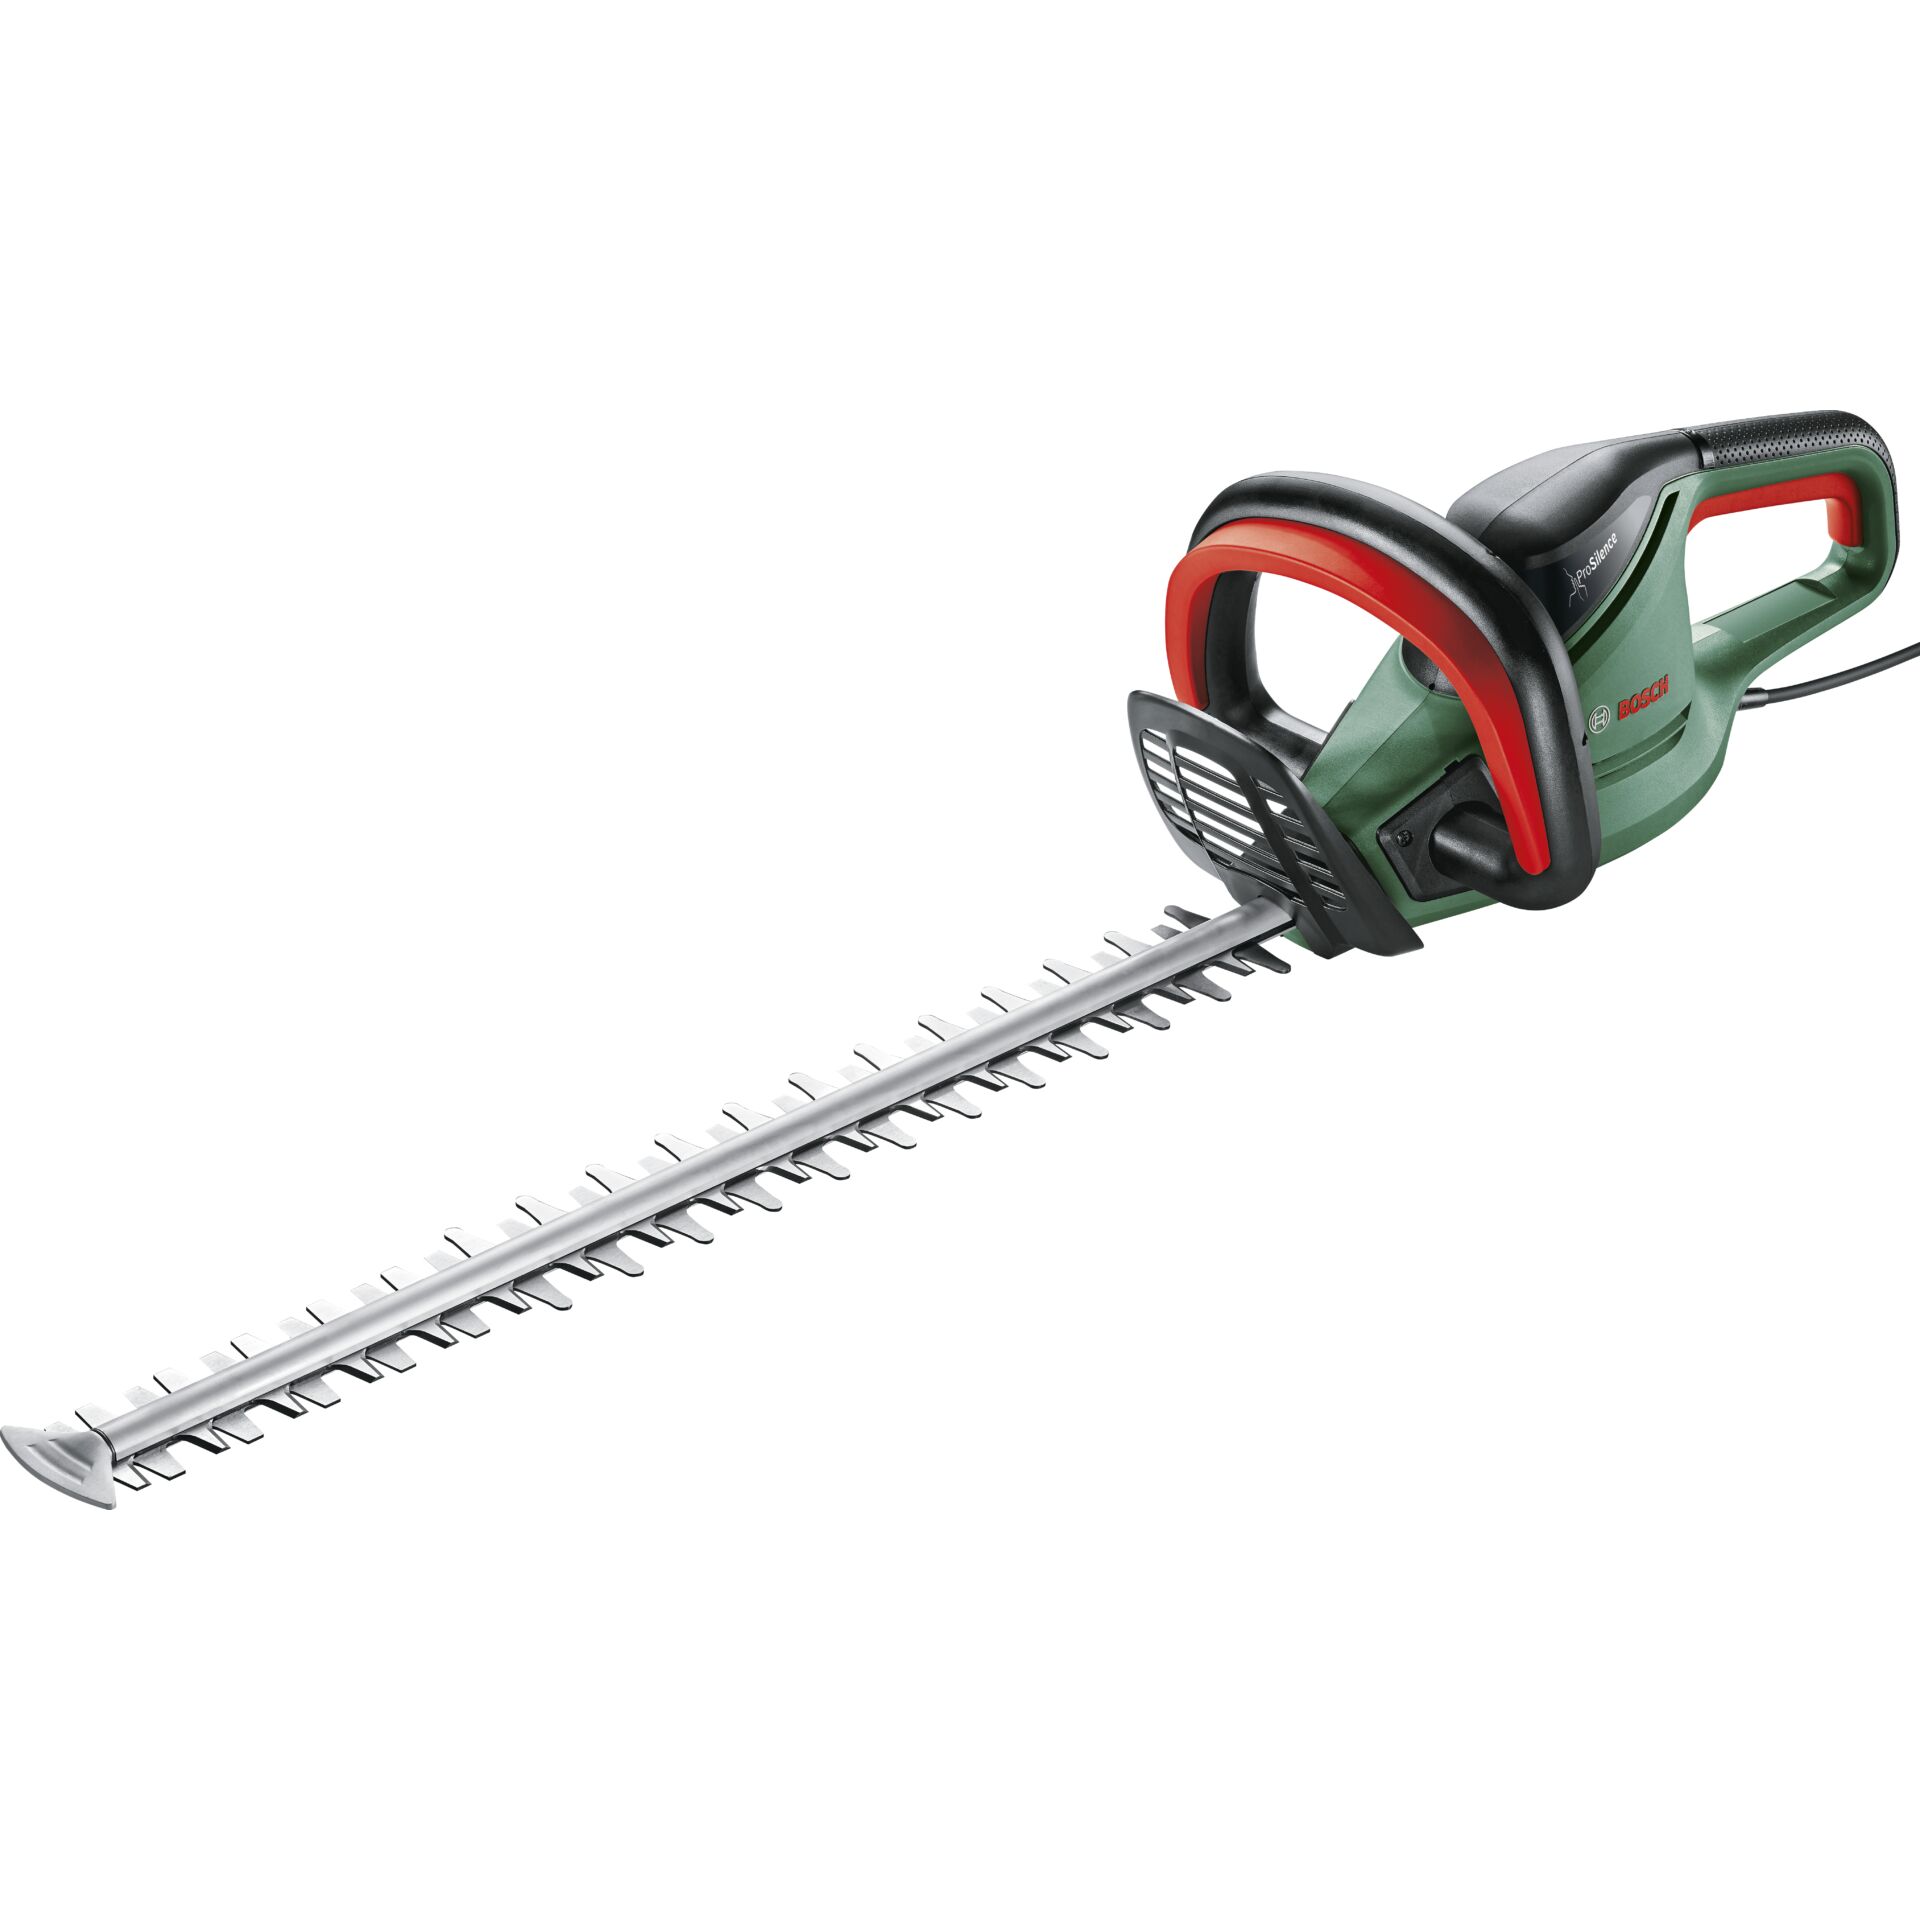 Bosch UniversalHedgeCut 50 electronic hedge clippers